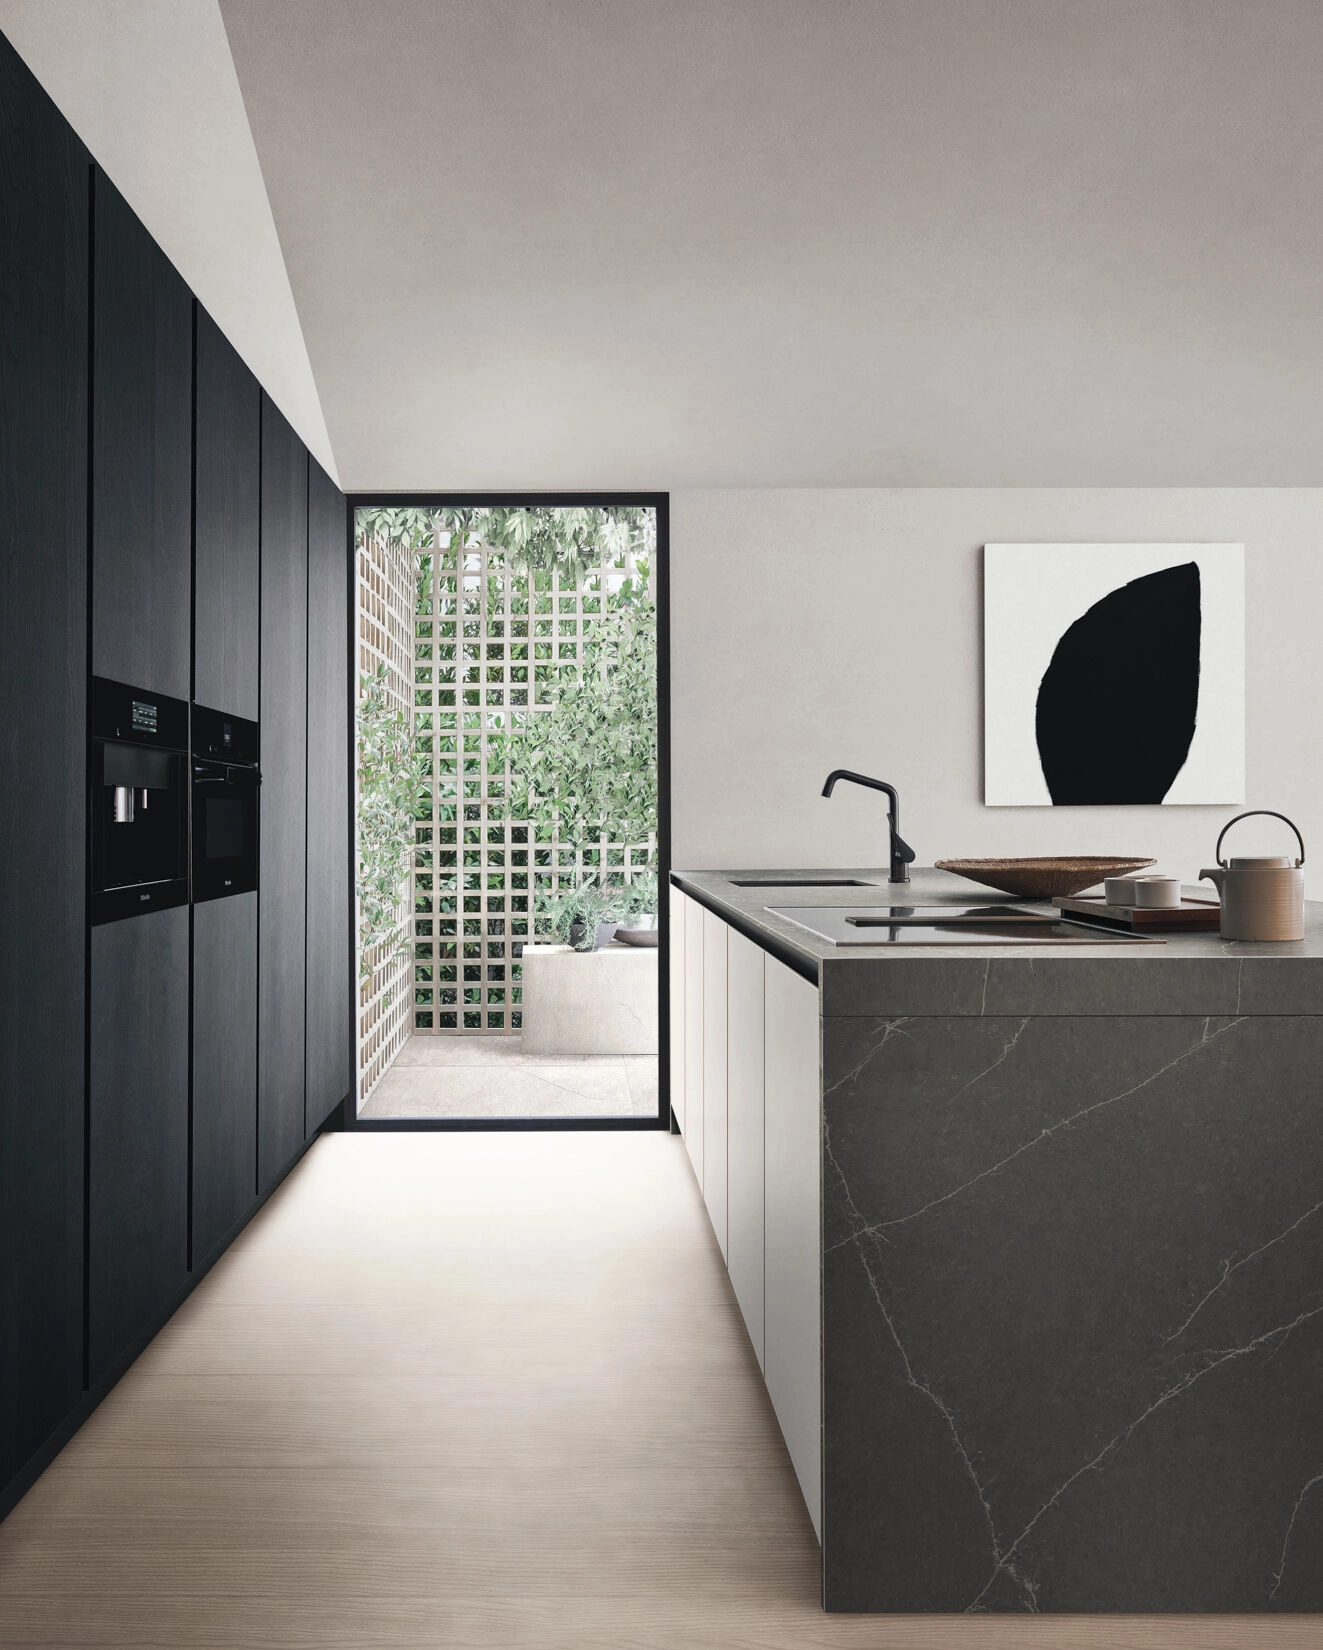 Image of an Arclinea kitchen with black columns and island with gray ceramic top and white veins